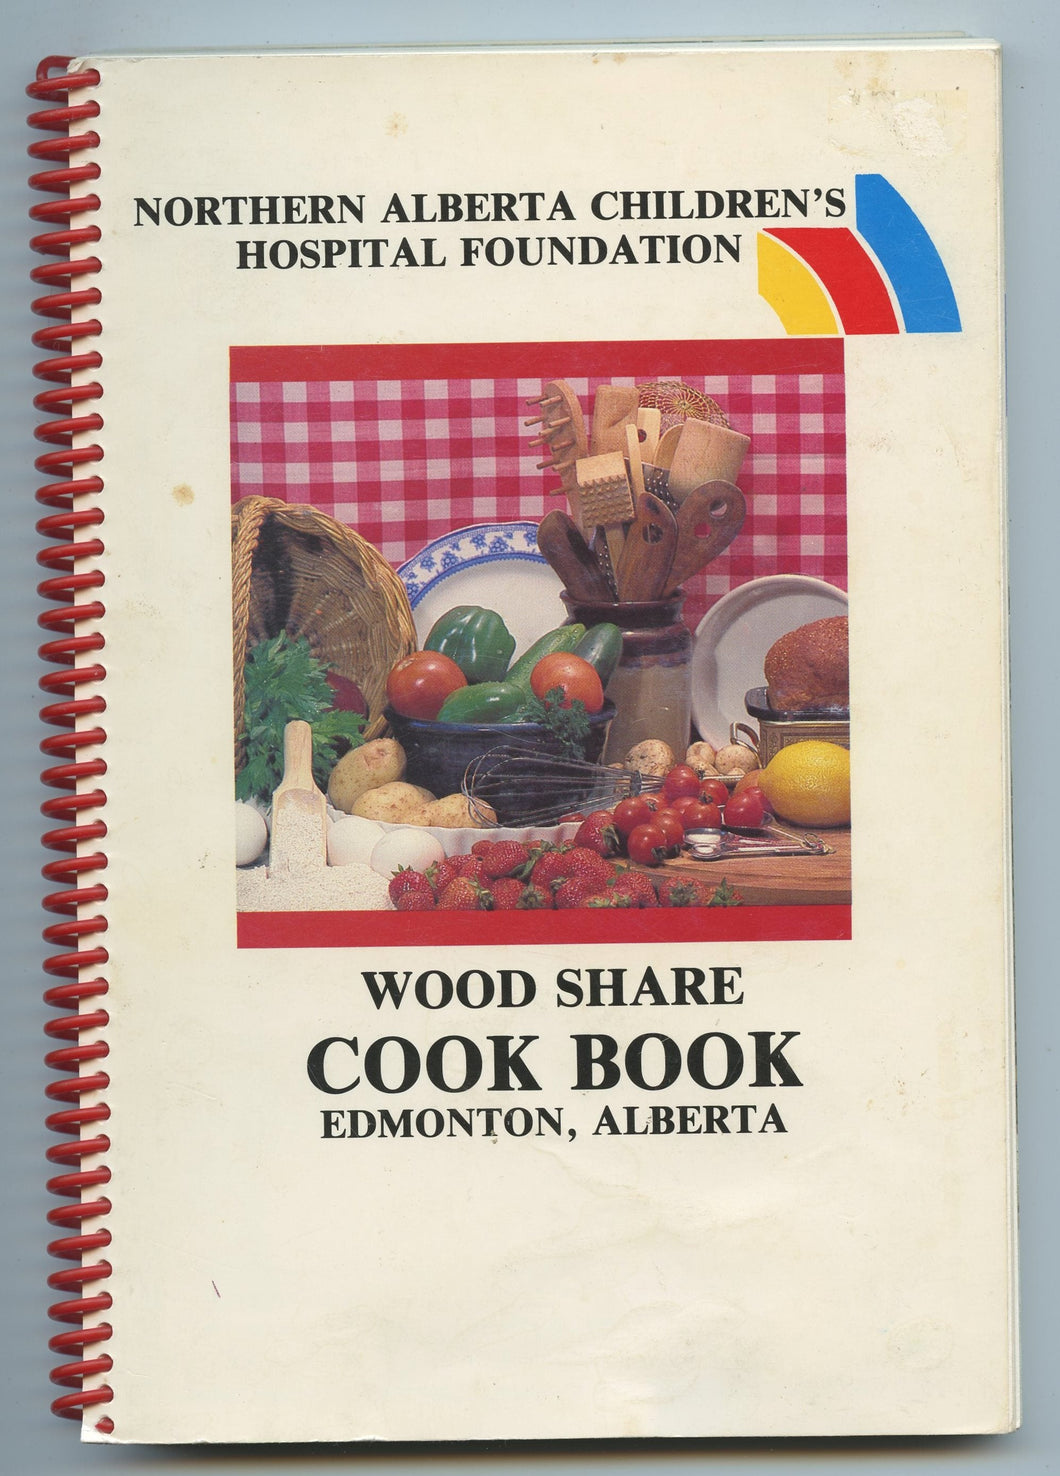 Wood Share Cook Book